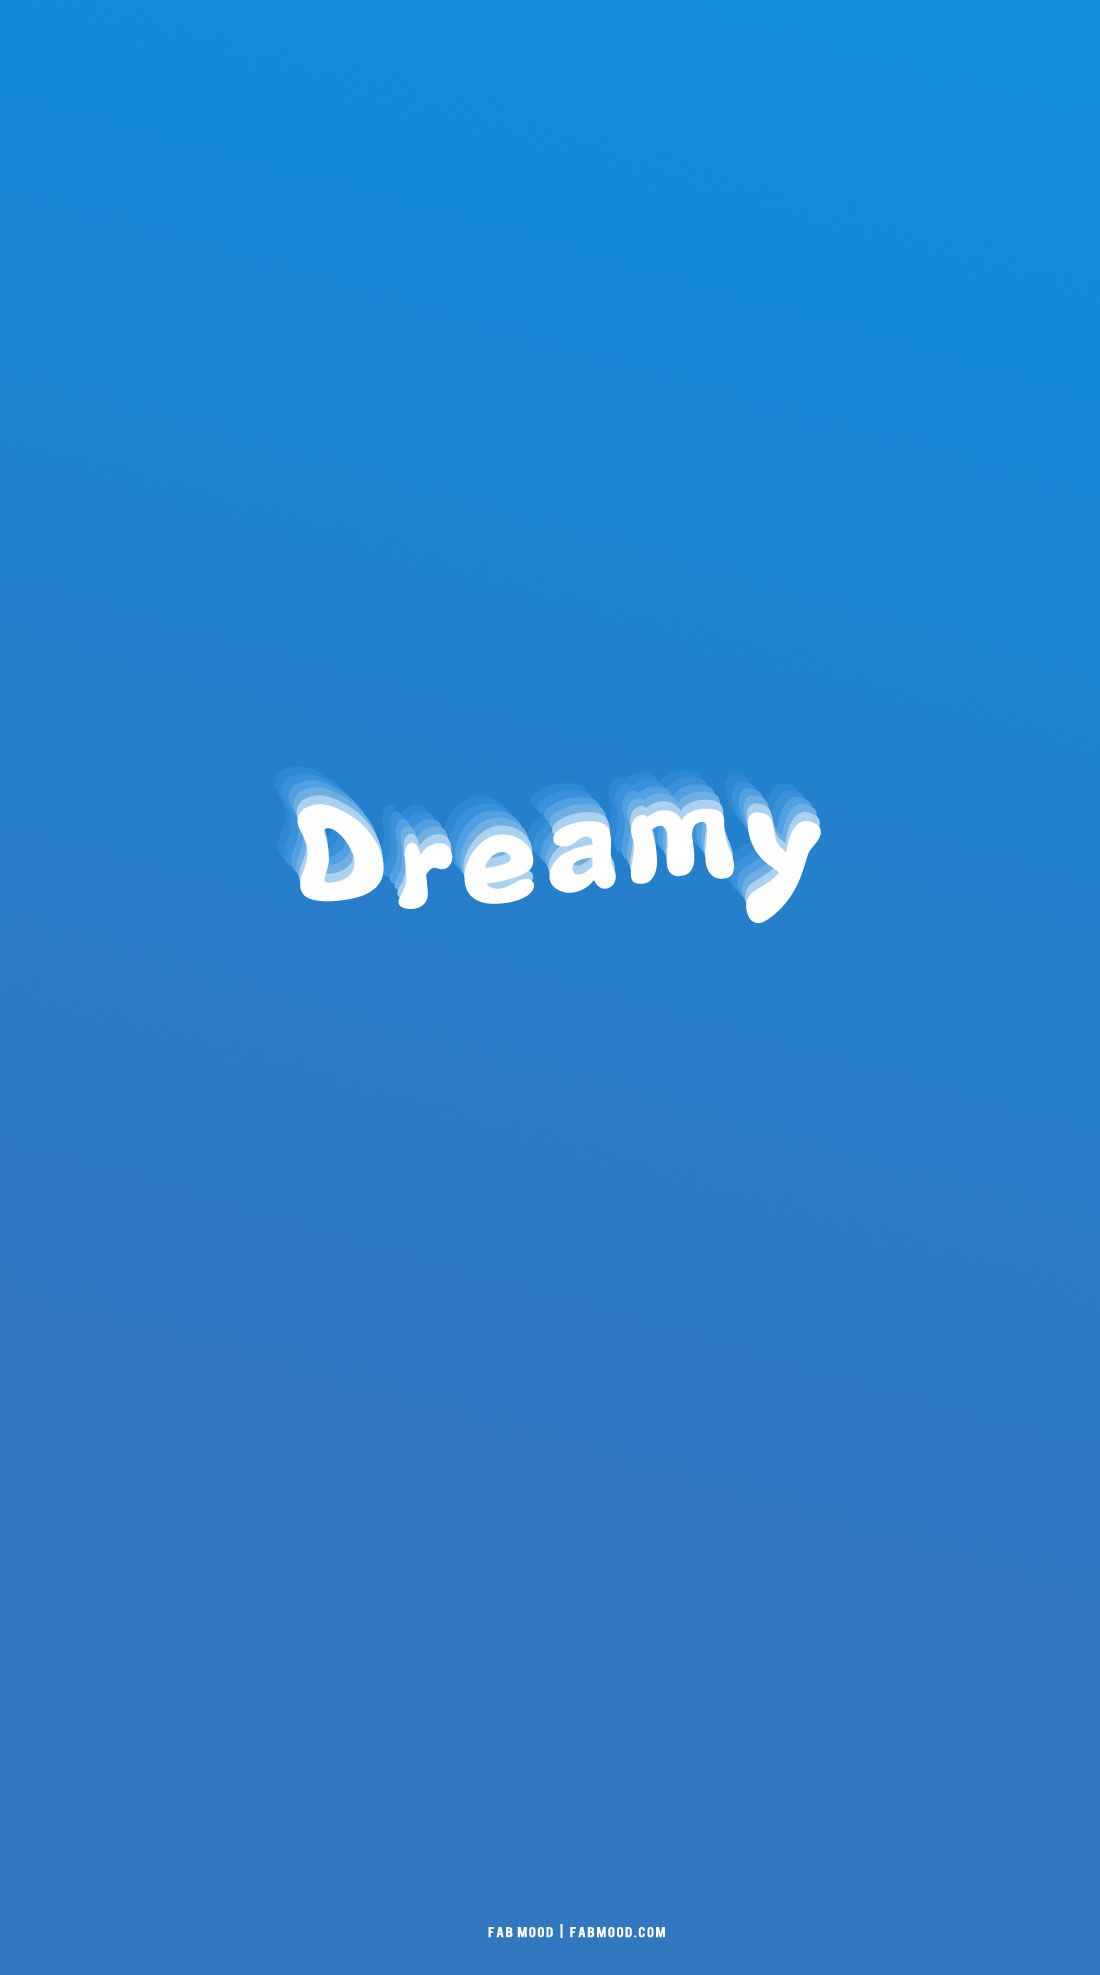 A blue background with the word dreamy in white - Blue, neon blue, May